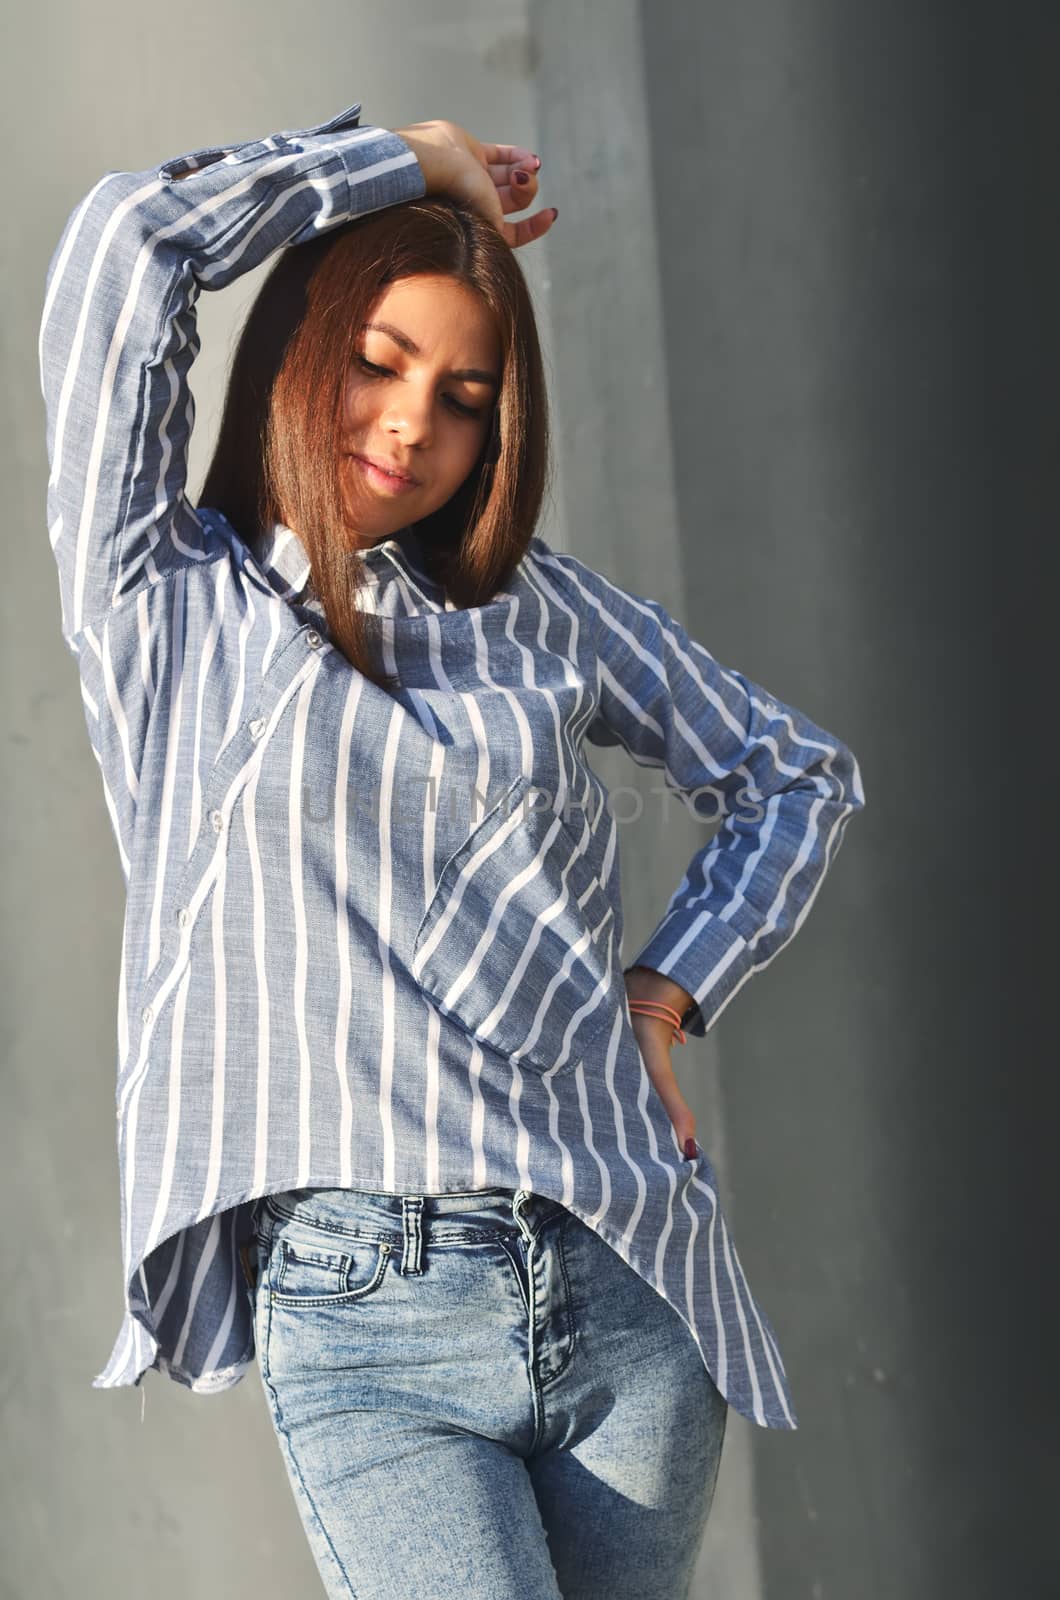 Young beautiful asian girl stands near the wall and posing and she dressed a striped shirt by xzgorik